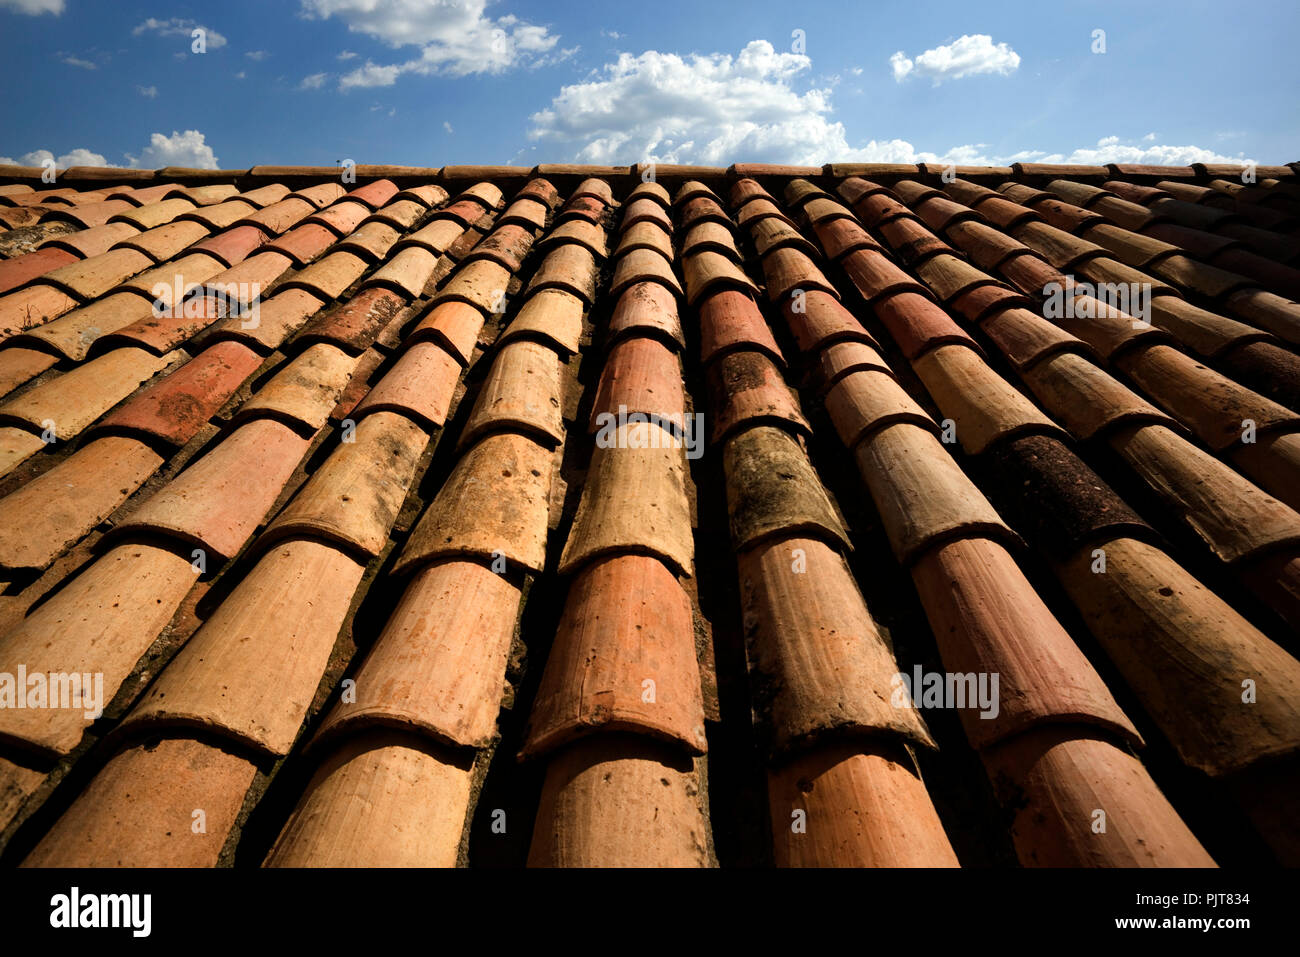 A roof made from terracotta tiles is seen in Lleida, Spain September 6, 2018. Photograph John Voos/TSL Stock Photo